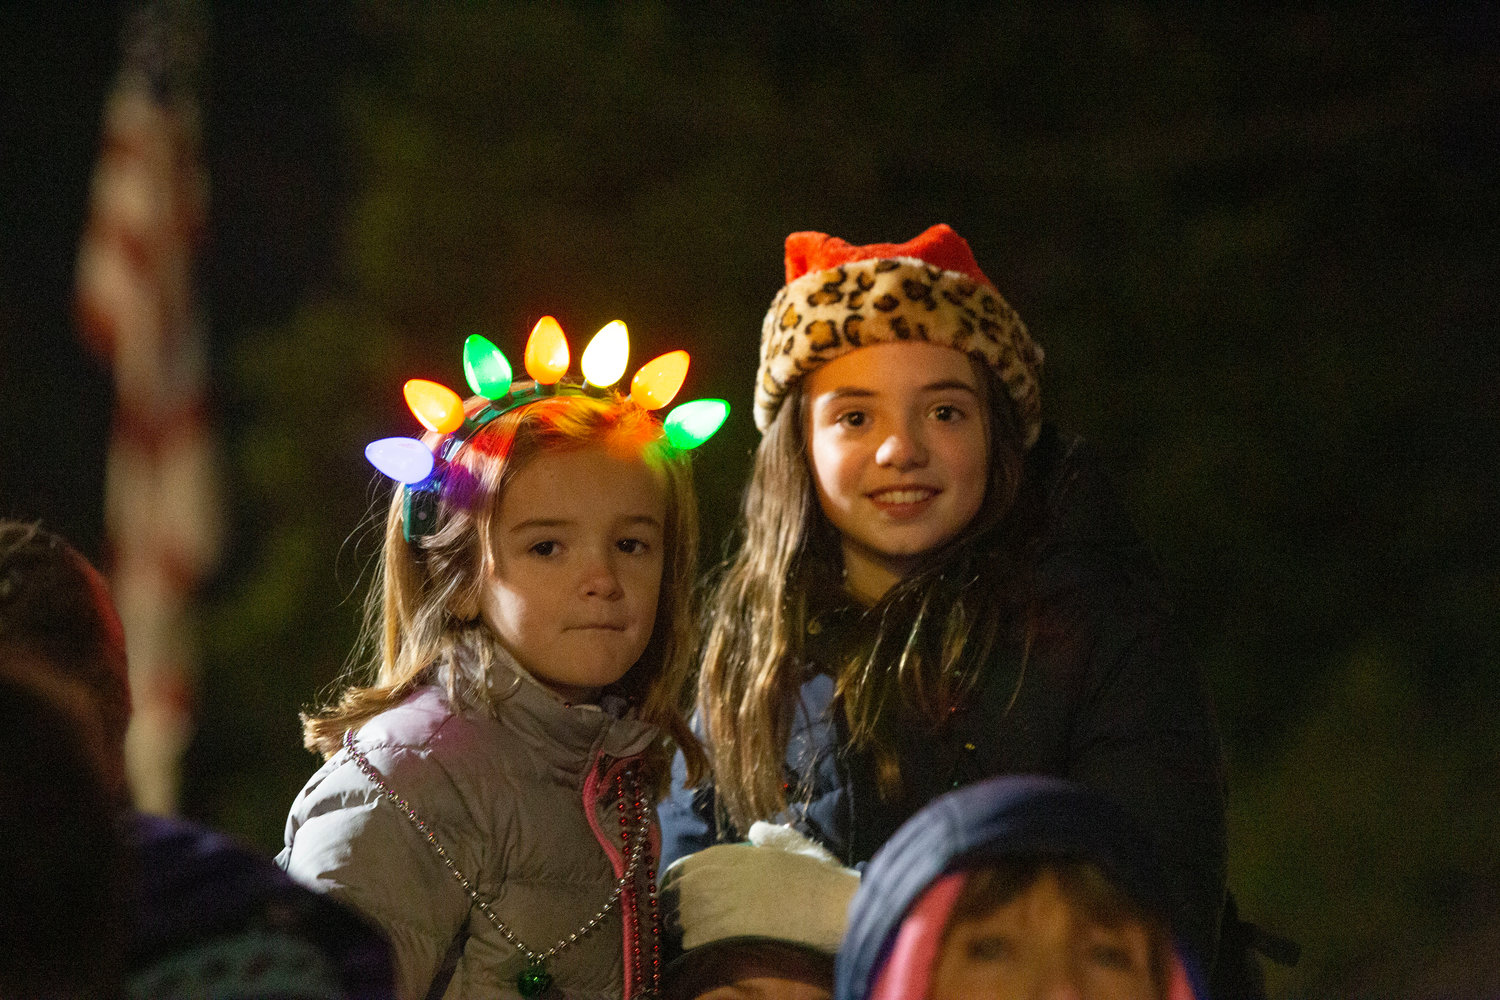 Festive headgear was seen throughout the crowd, as evidenced by these two girls enjoying the show.